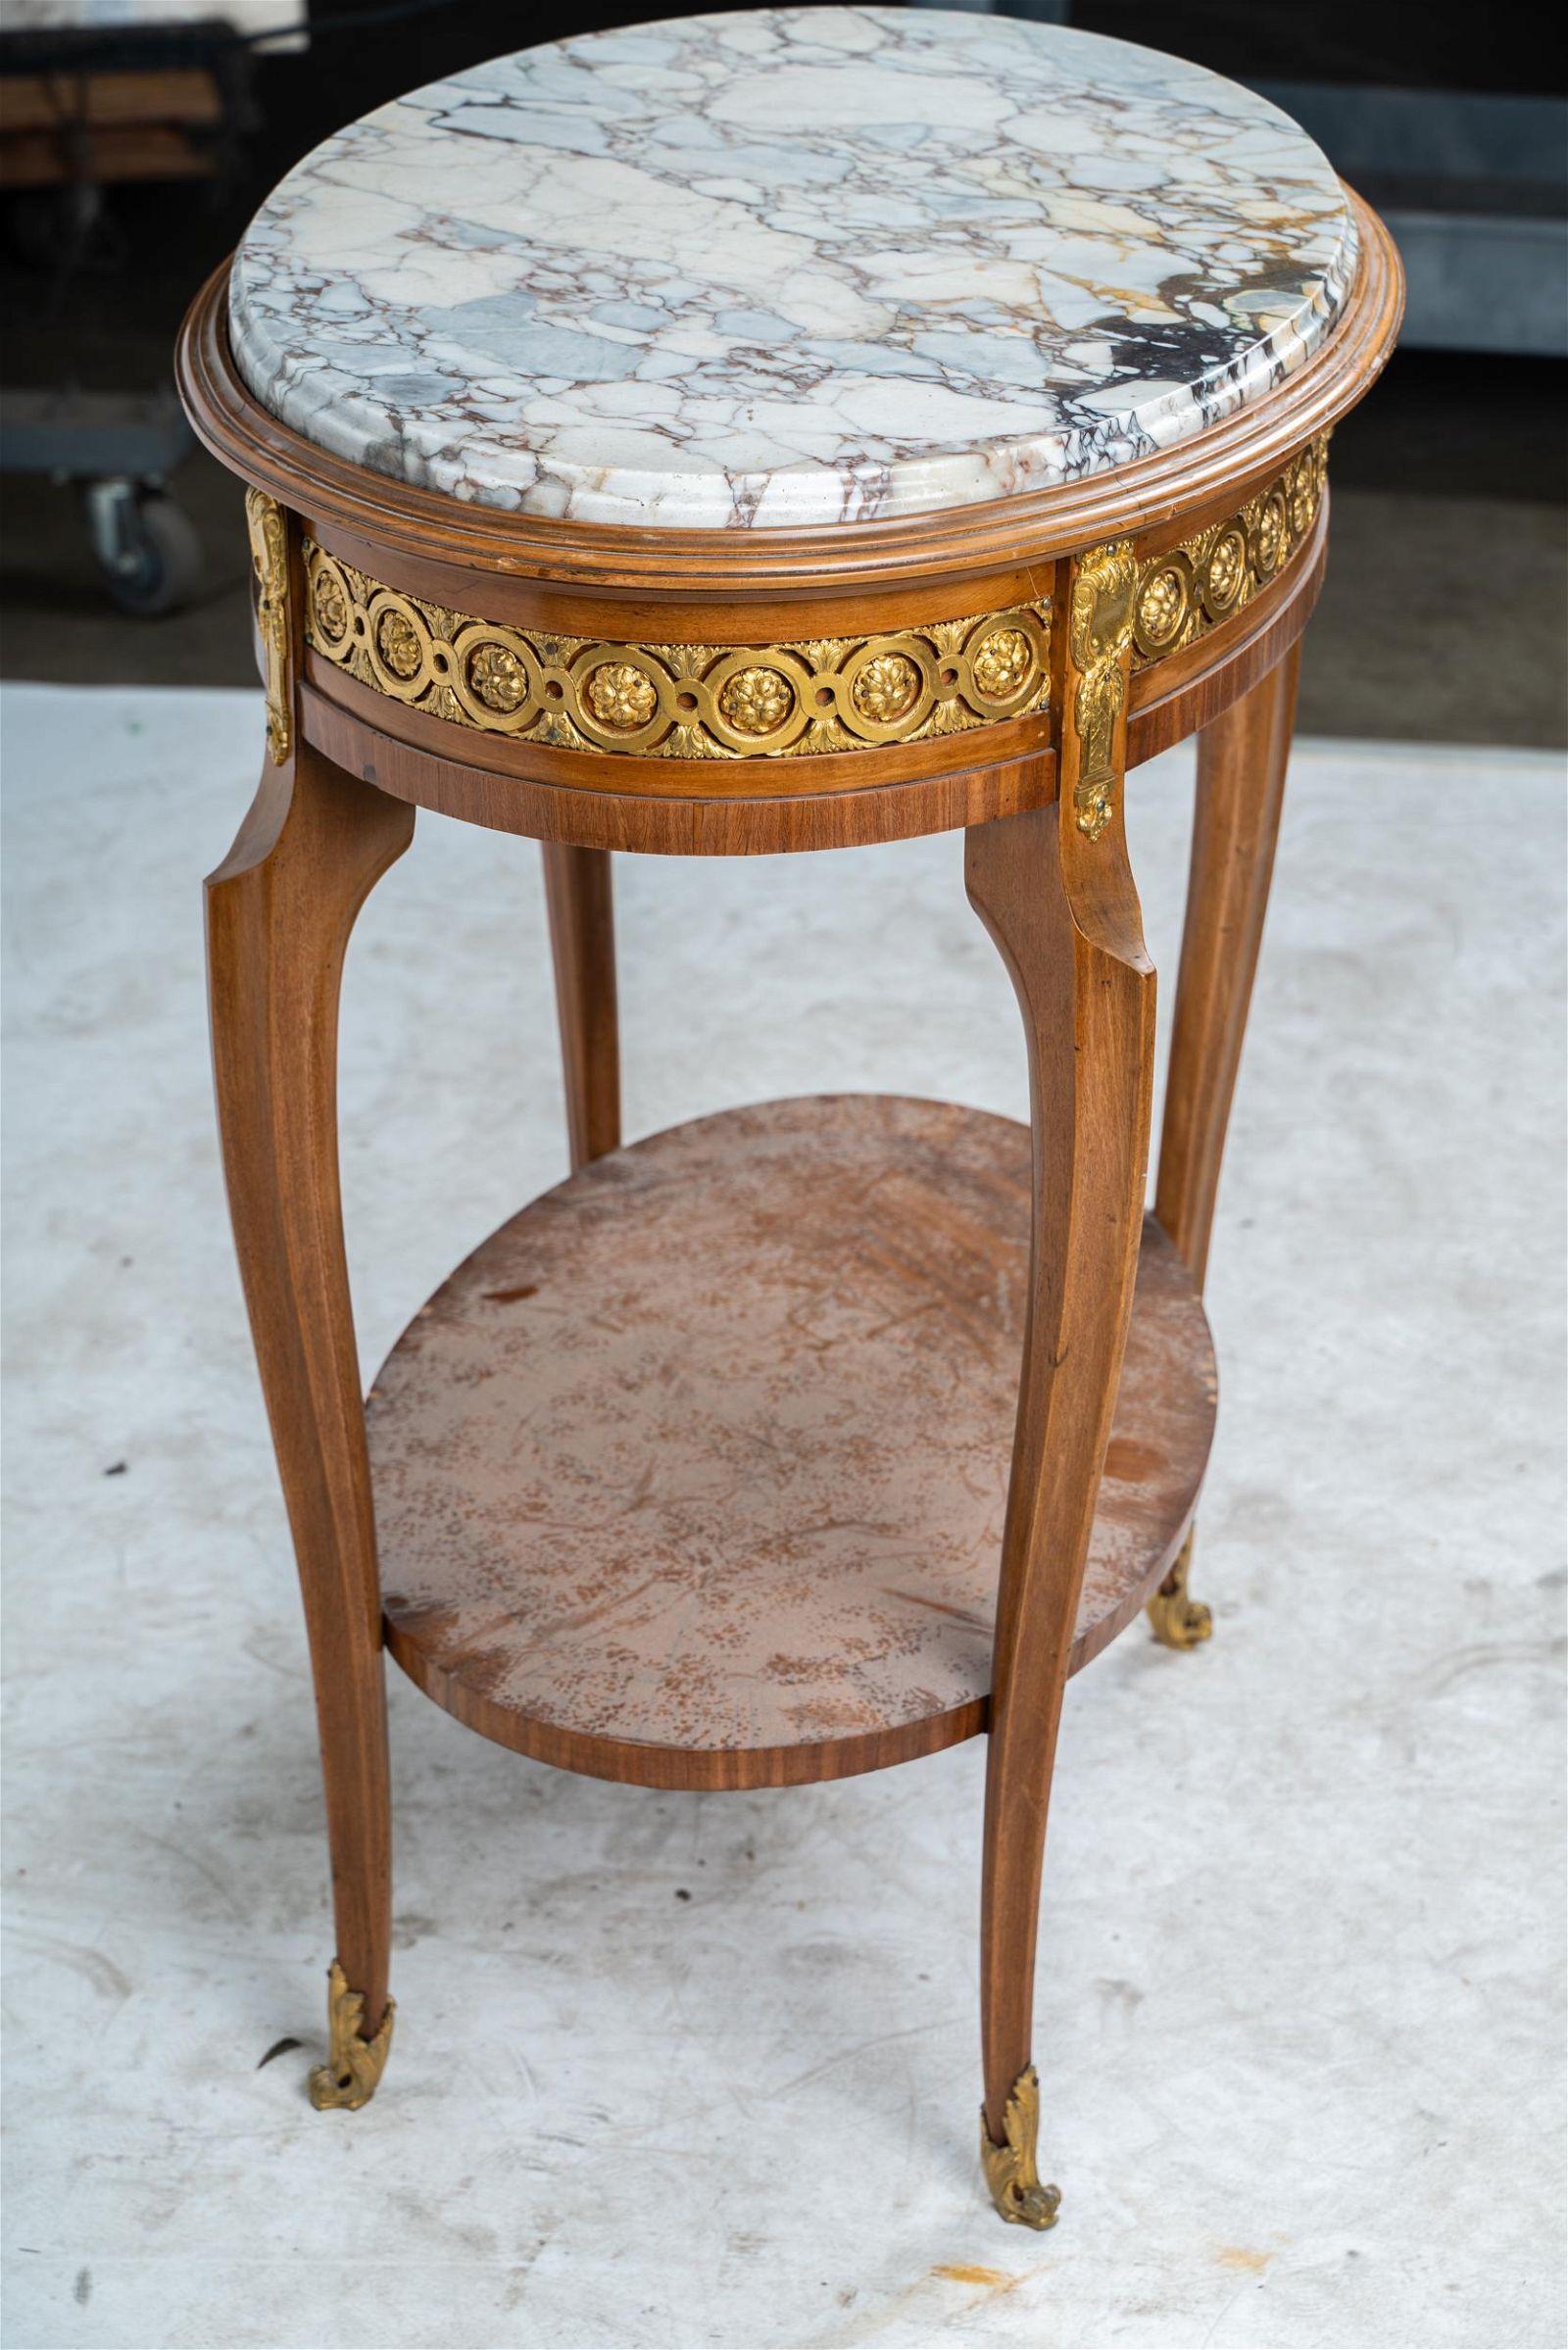 Antique French Louis XVI Transitional Walnut Marble Inset Gueridon Late 19th C For Sale 1